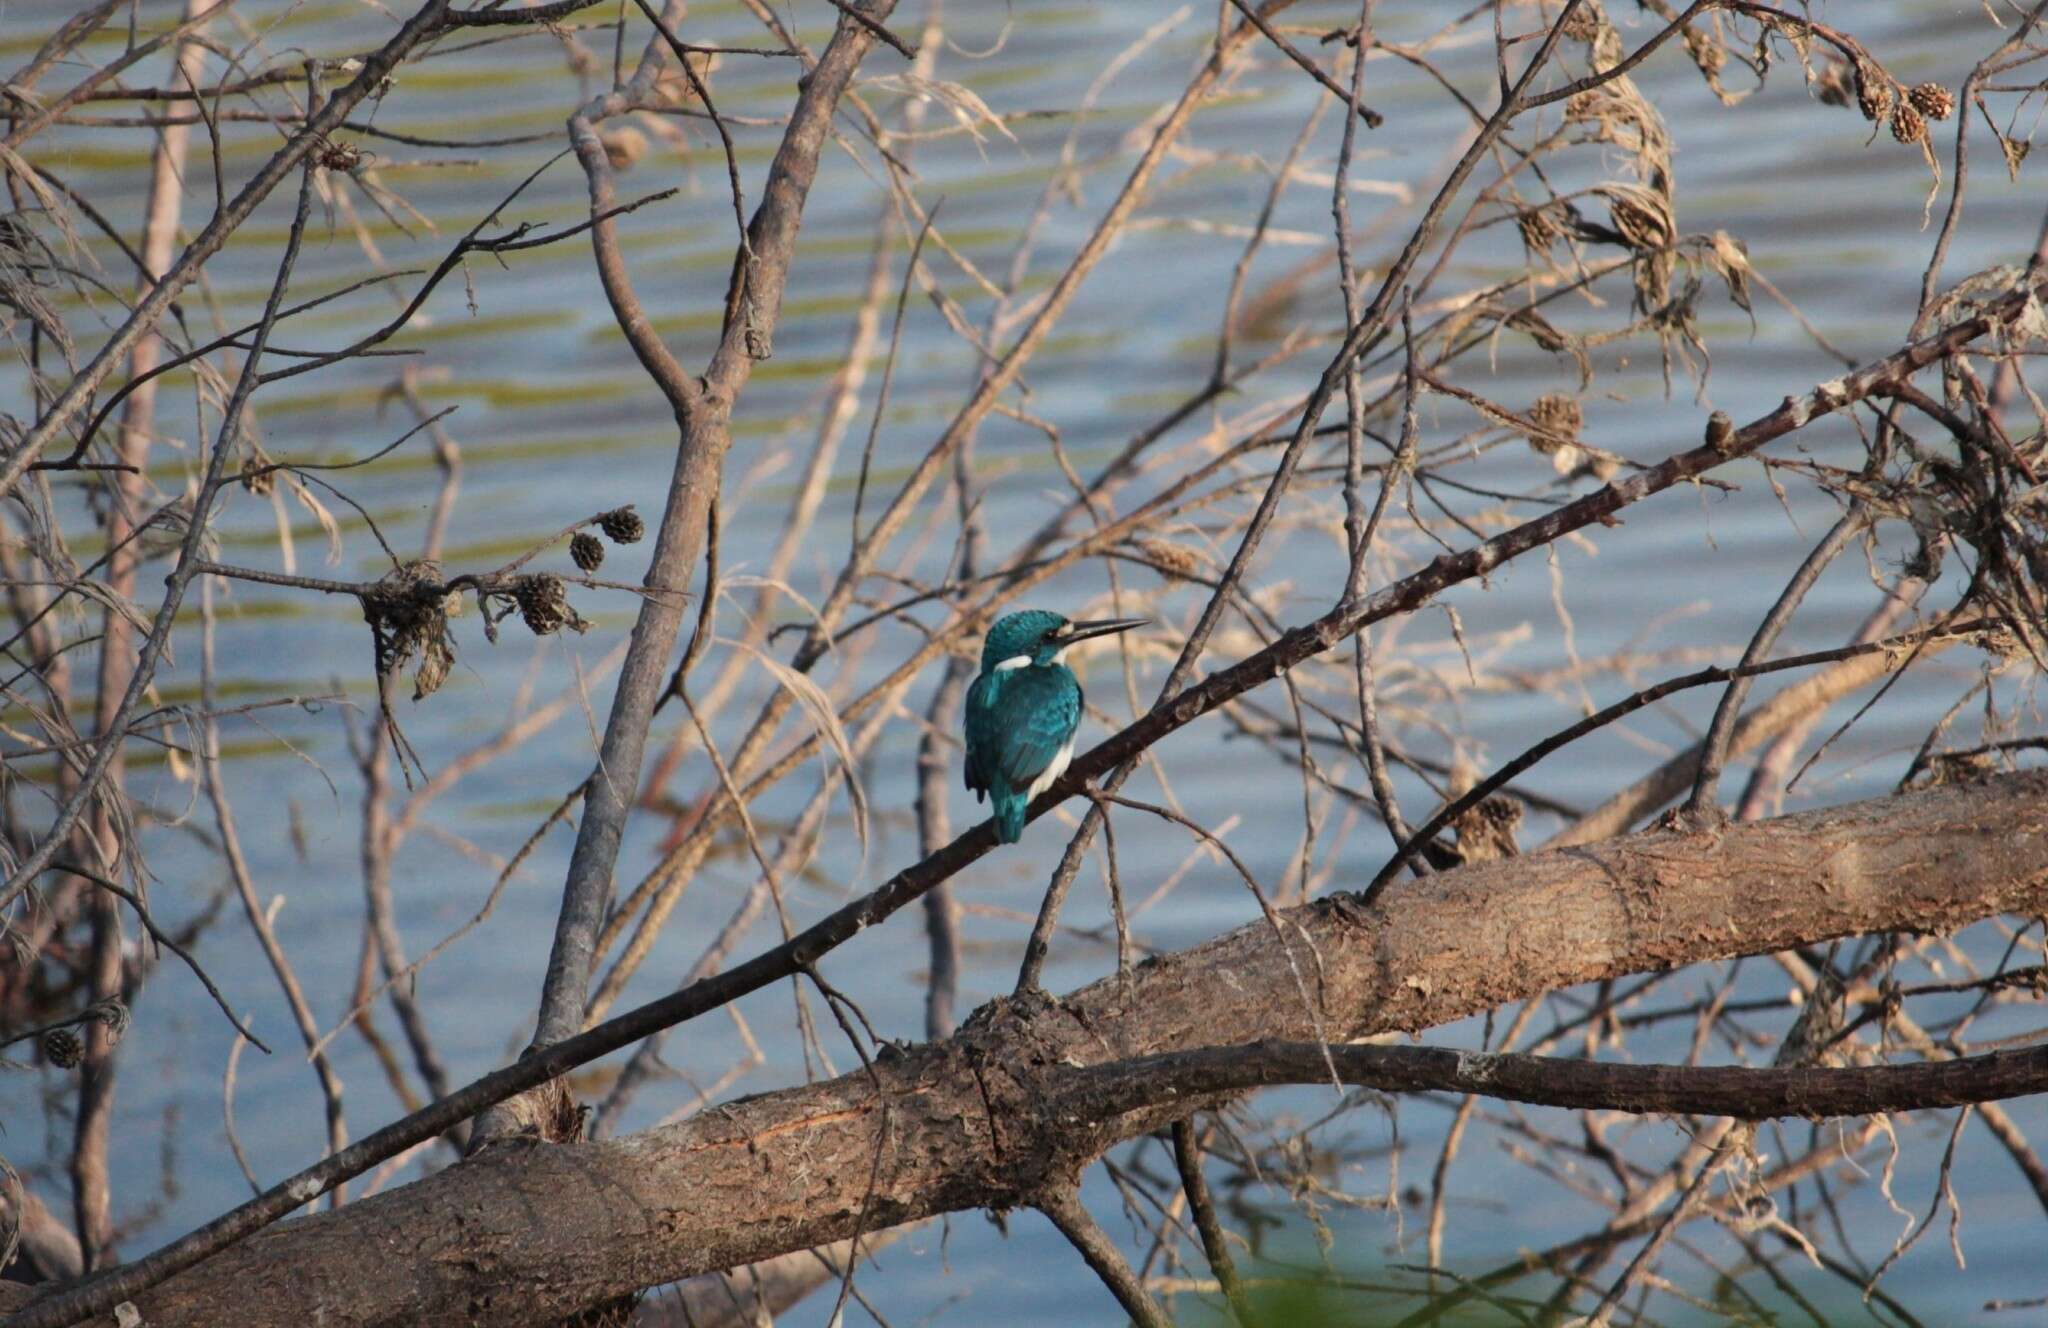 Image of Cerulean Kingfisher